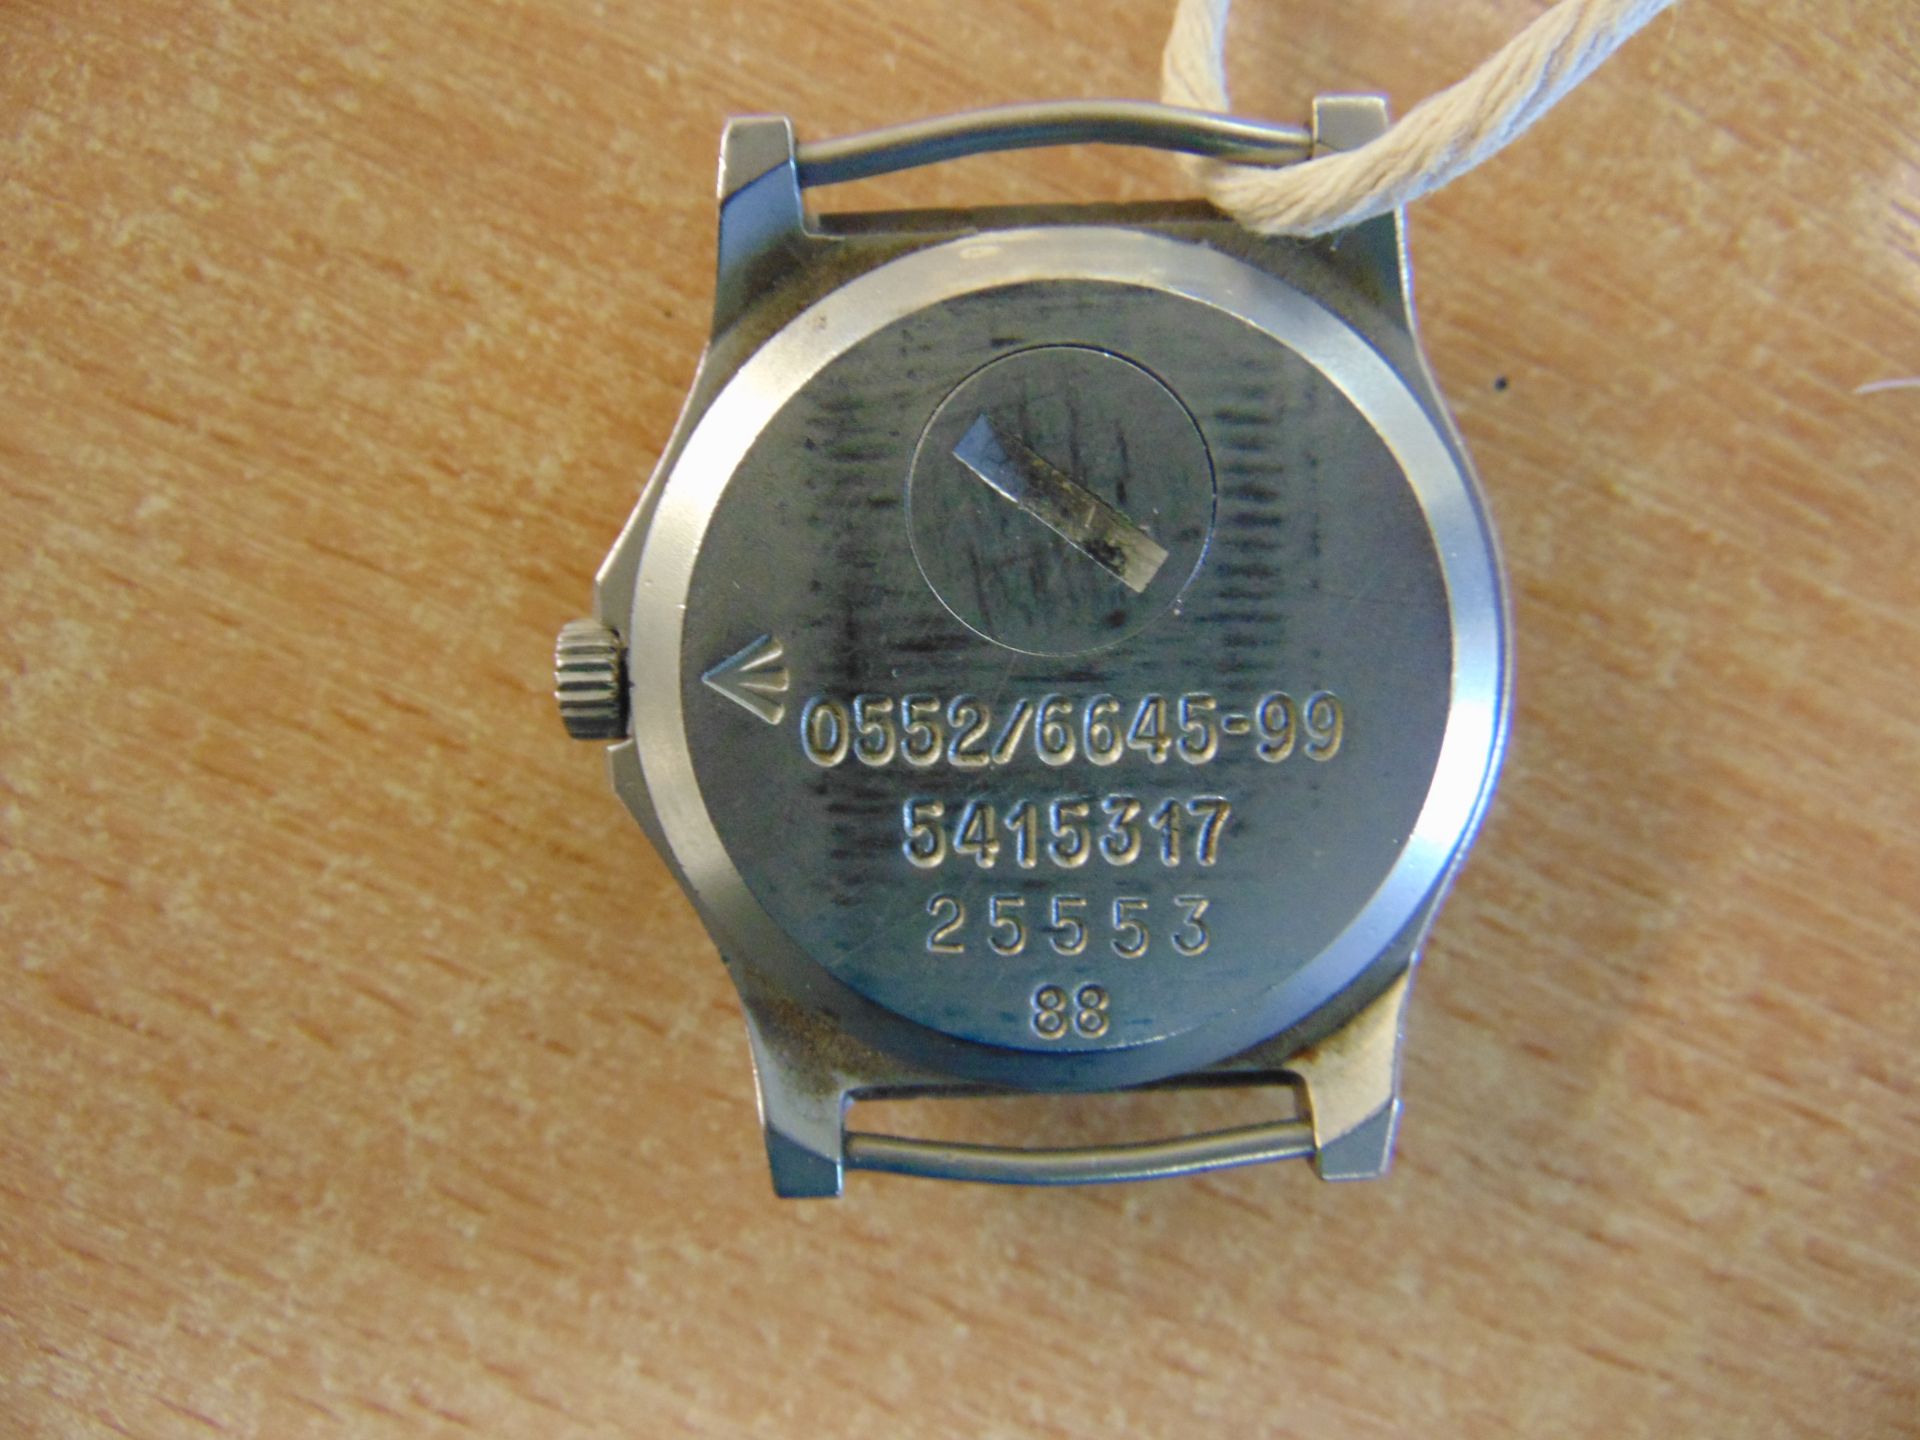 CWC 0552 NAVY/ ROYAL MARINES ISSUE SERVICE WATCH NATO MARKS DATE 1988- GLASS CRACKED - Image 3 of 6